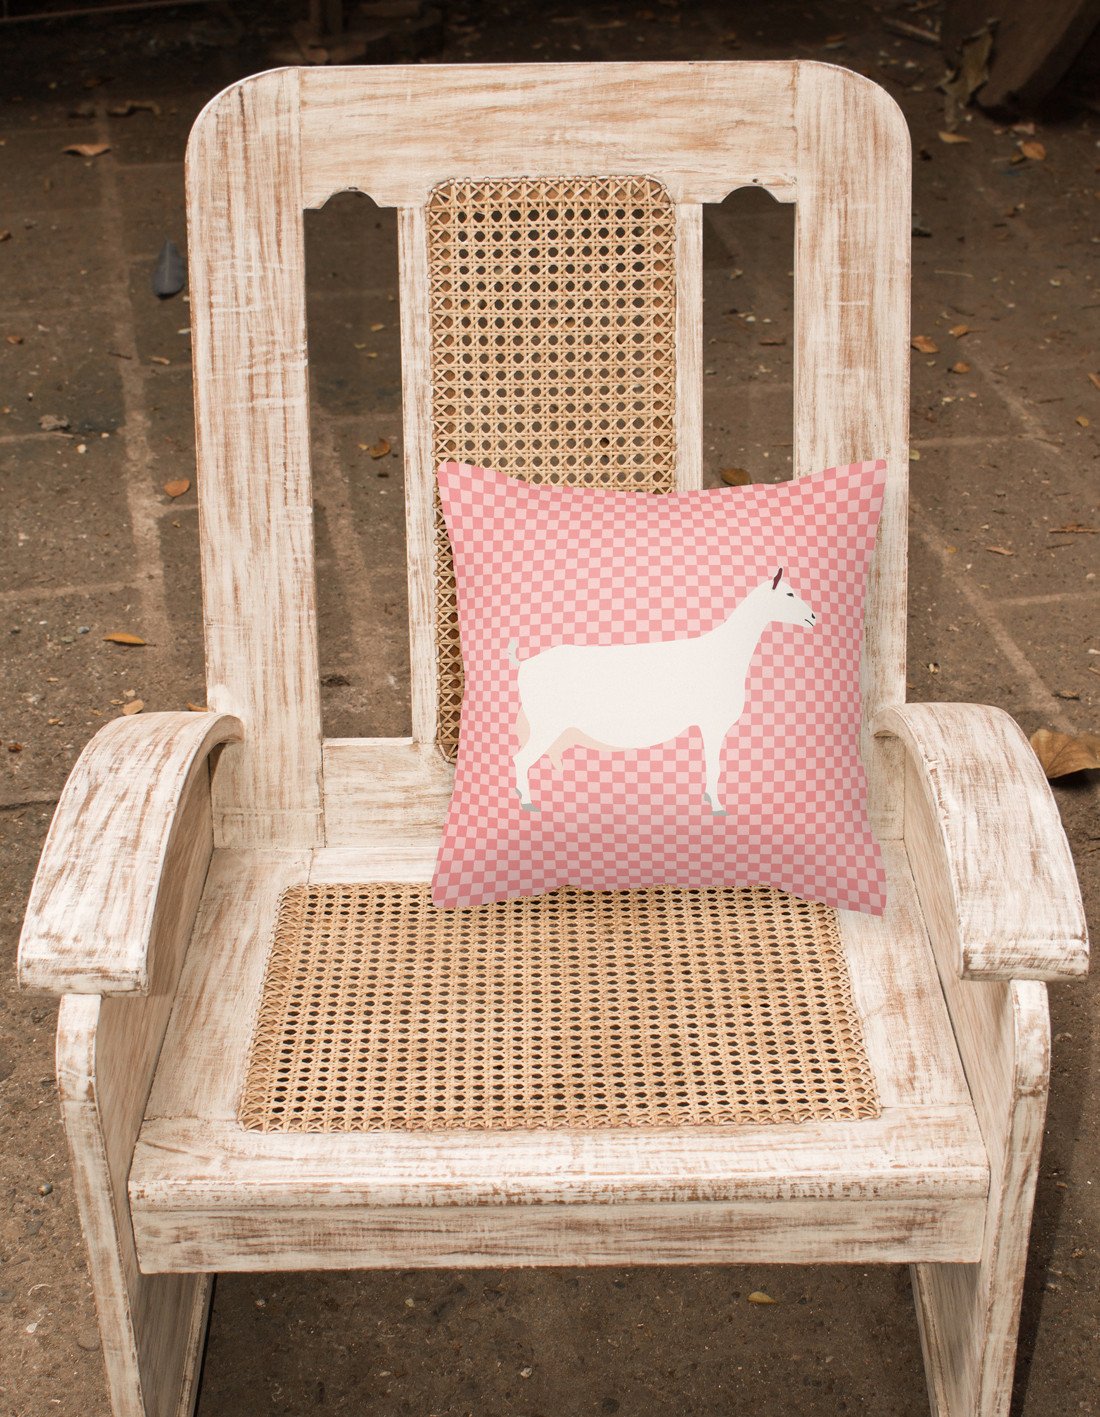 Saanen Goat Pink Check Fabric Decorative Pillow BB7889PW1818 by Caroline's Treasures